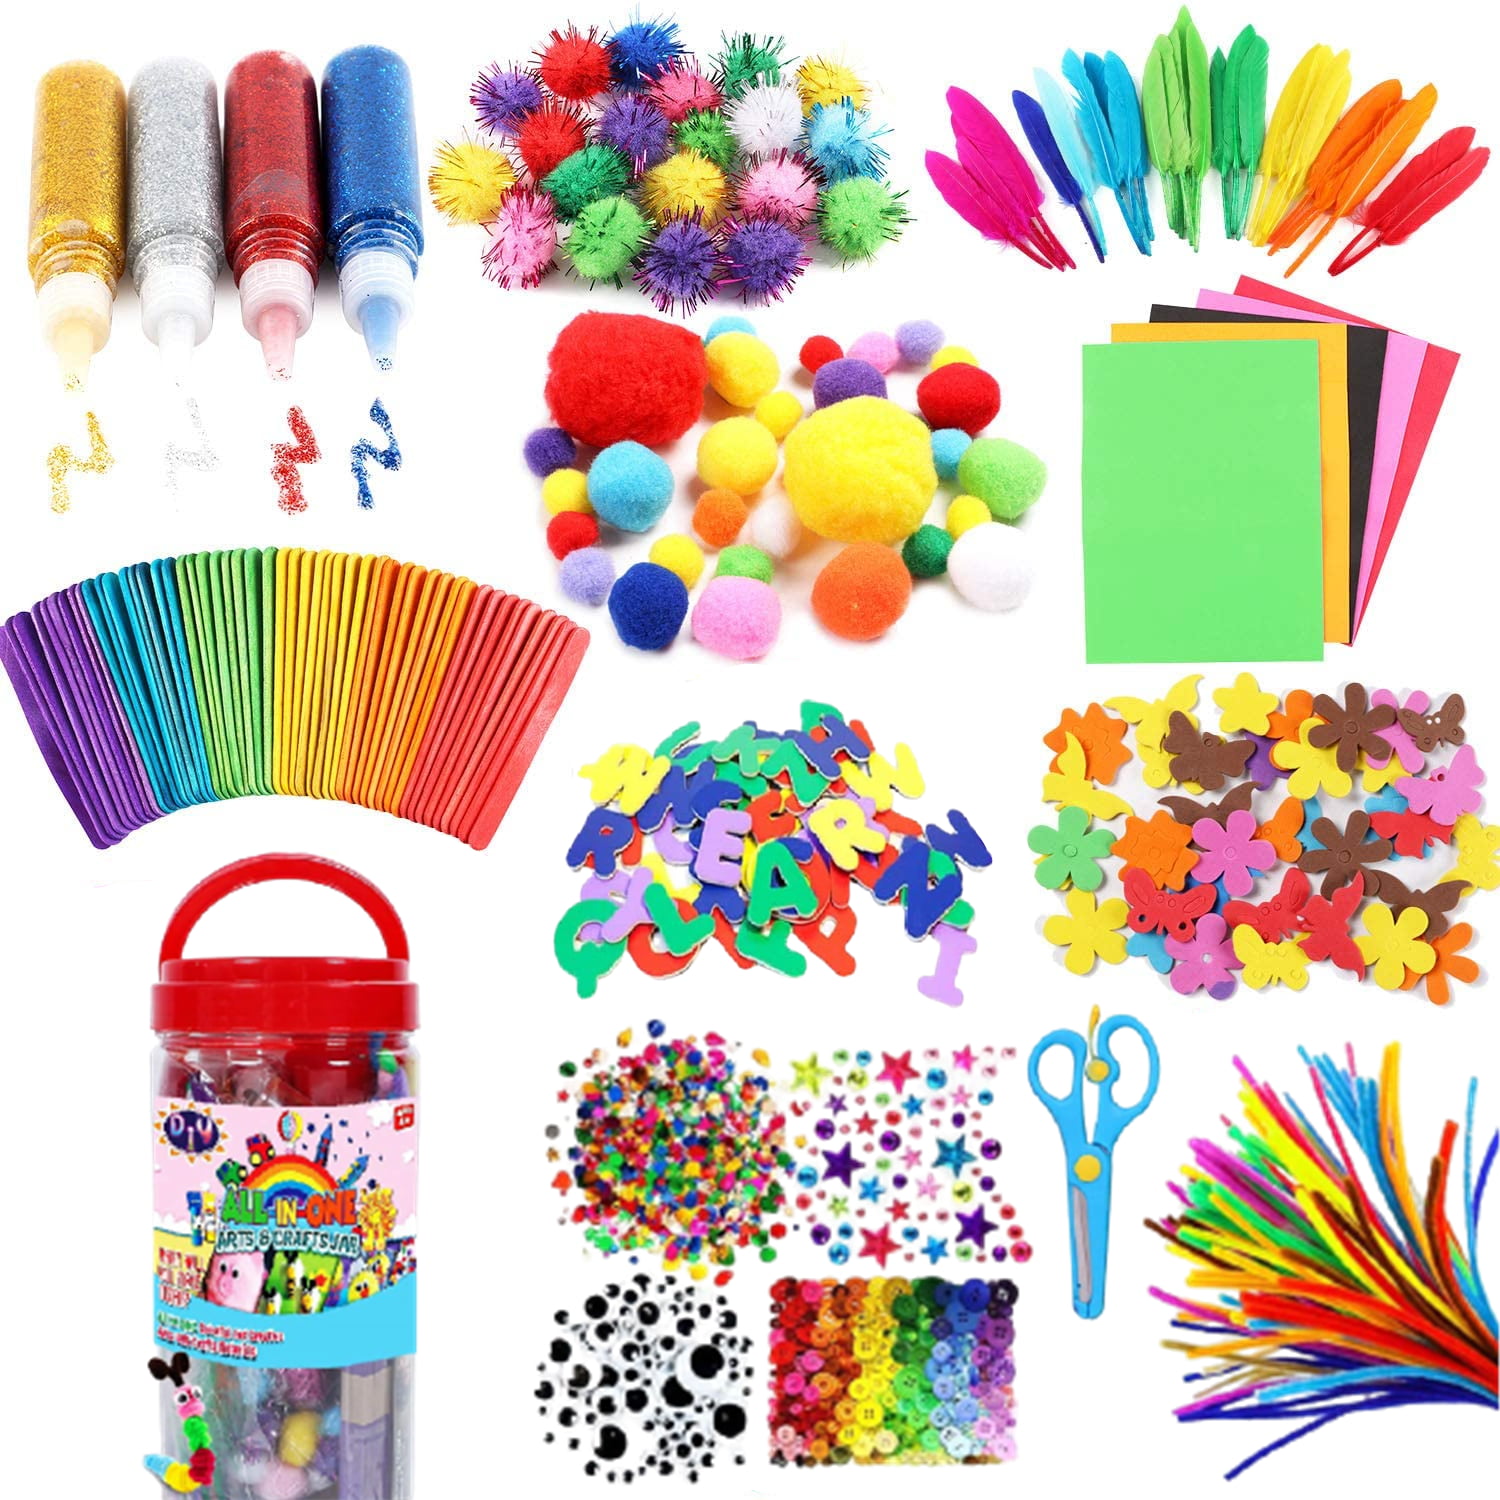 700 Pcs 5 Colors DIY Art and Crafts Creative Projects and Decorations for Kids and Toddlers Smooth at Both Ends with 200 pcs 3 Sizes Wiggle Googly Eyes-Color2 Creativity Craft Chenille Pipe Cleaners